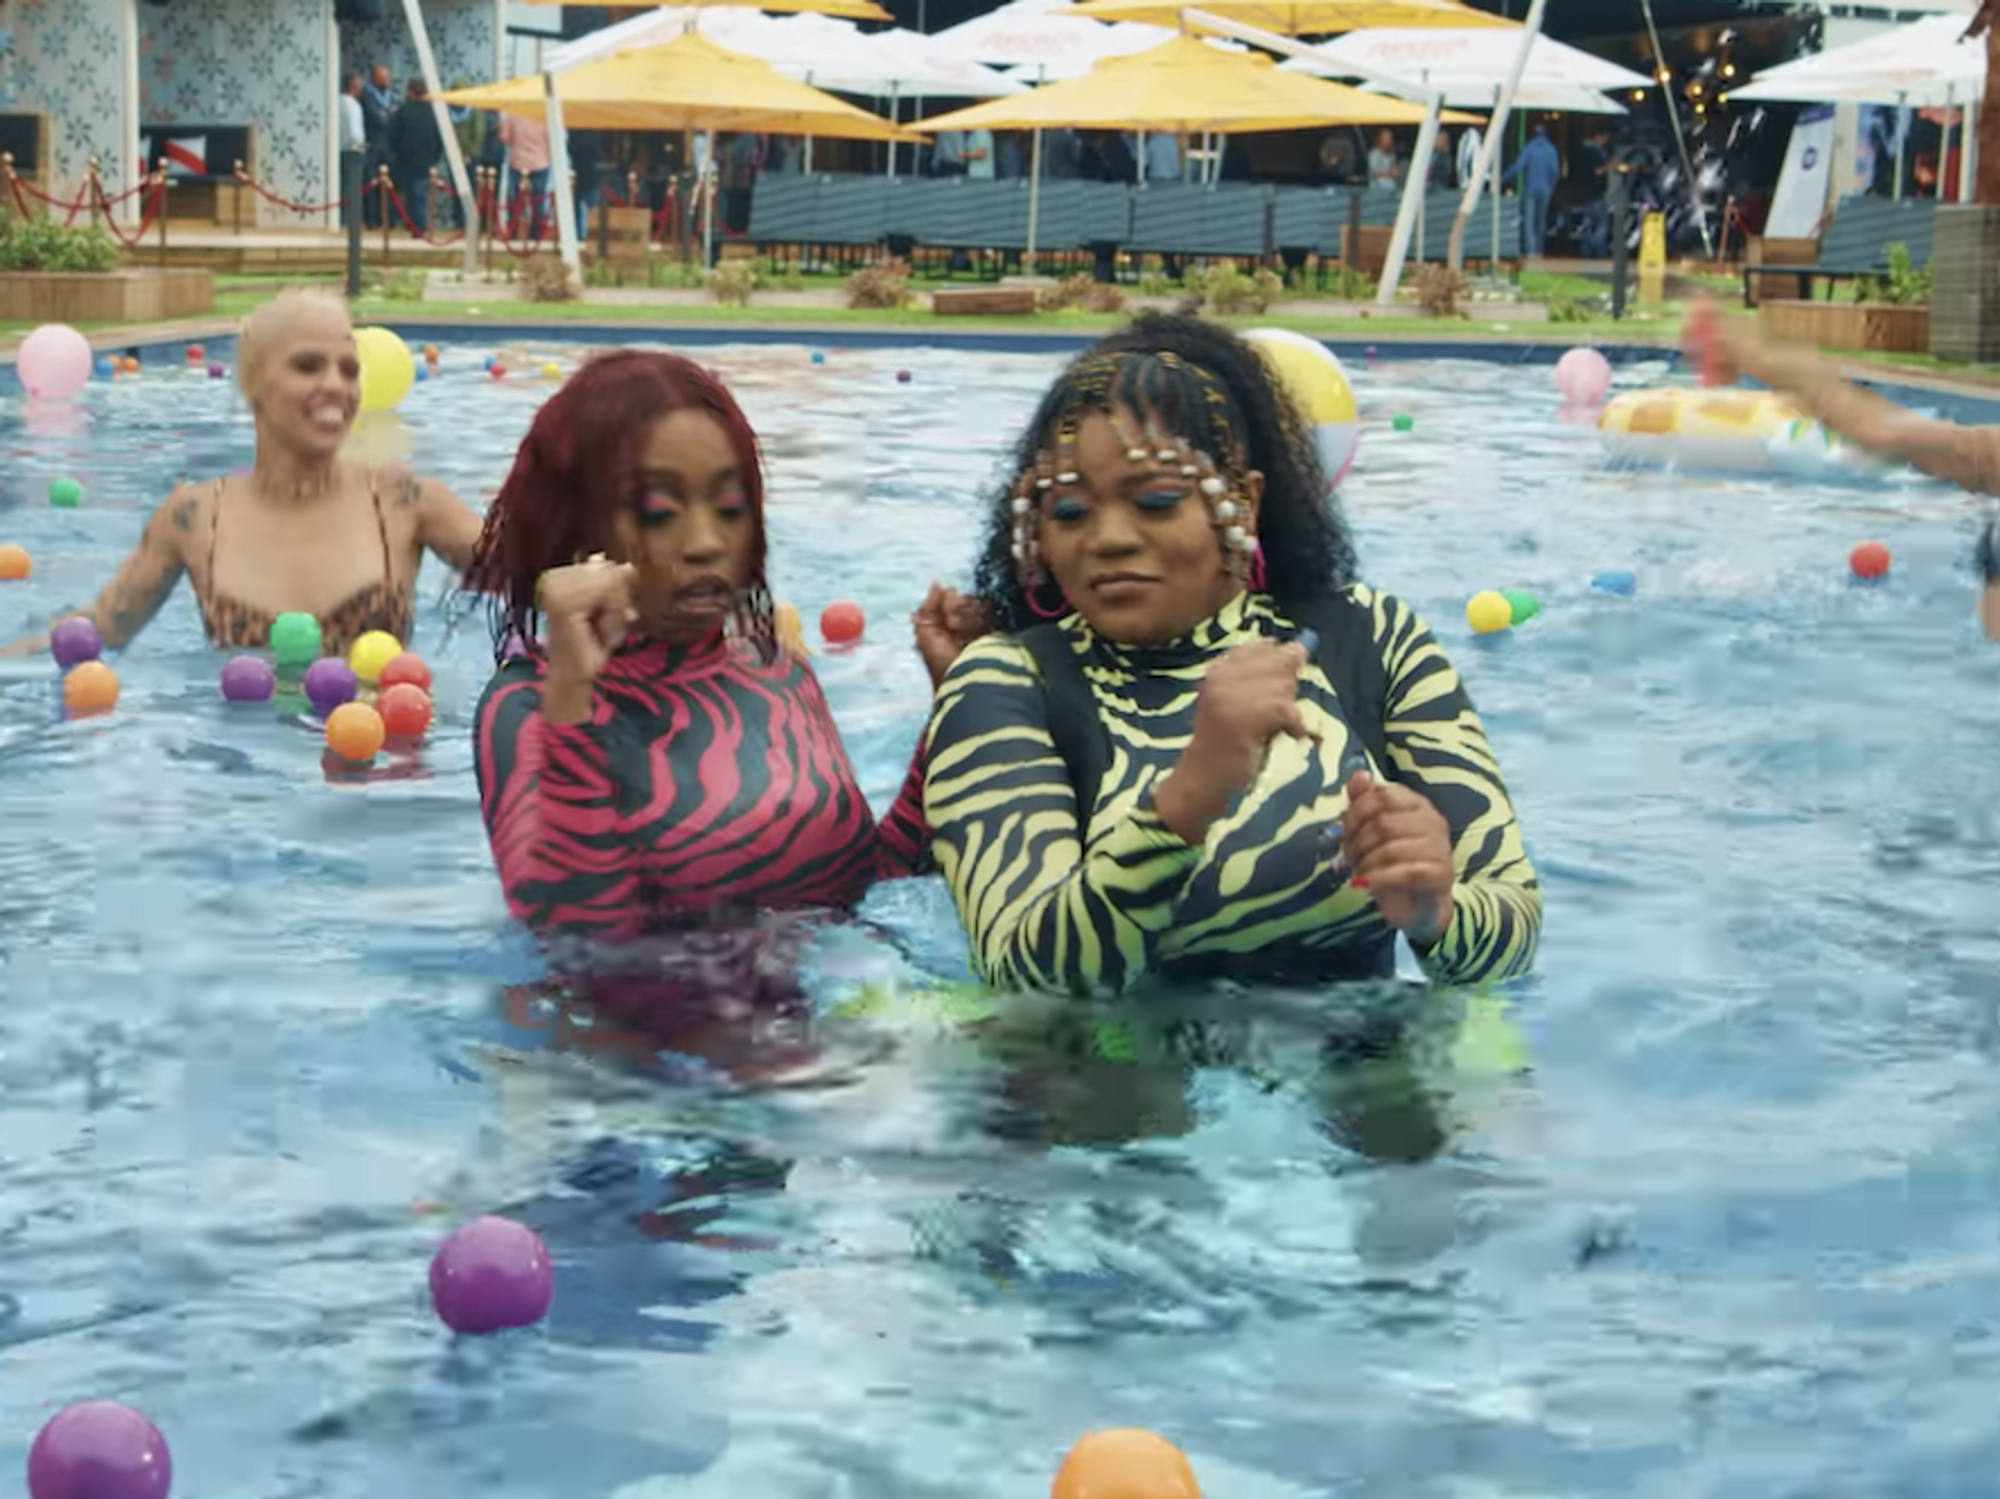 Busiswa and Kamo Mphela Summon The Summer in New Visuals for Their Single ‘SBWL’